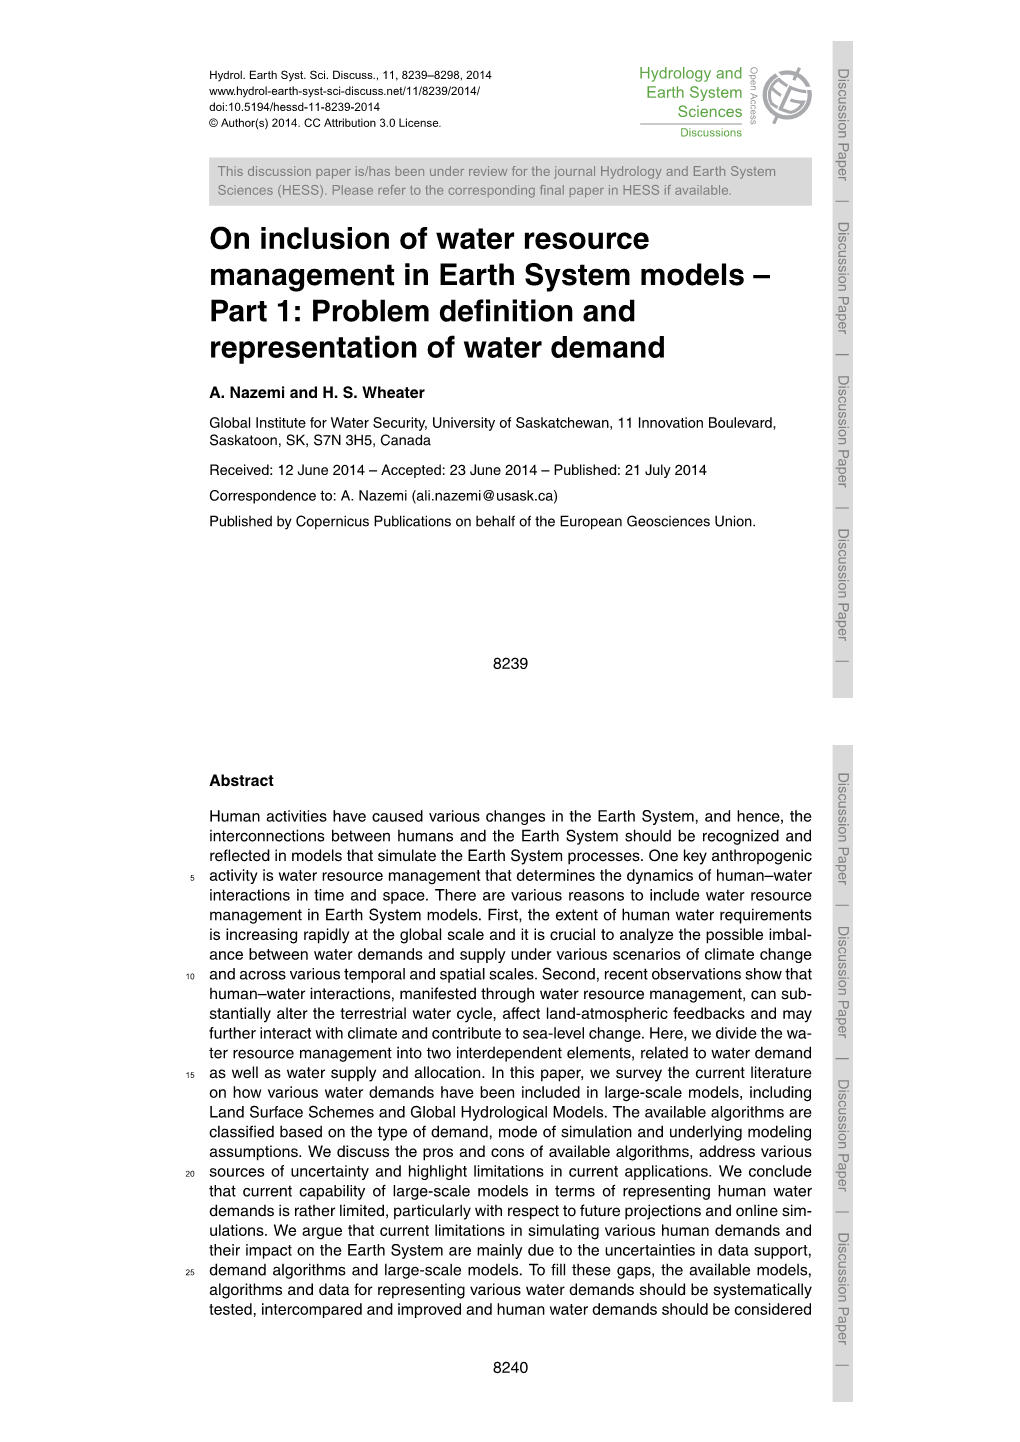 On Inclusion of Water Resource Management in Earth System Models – Part 1: Problem Definition and Representation of Water Dema